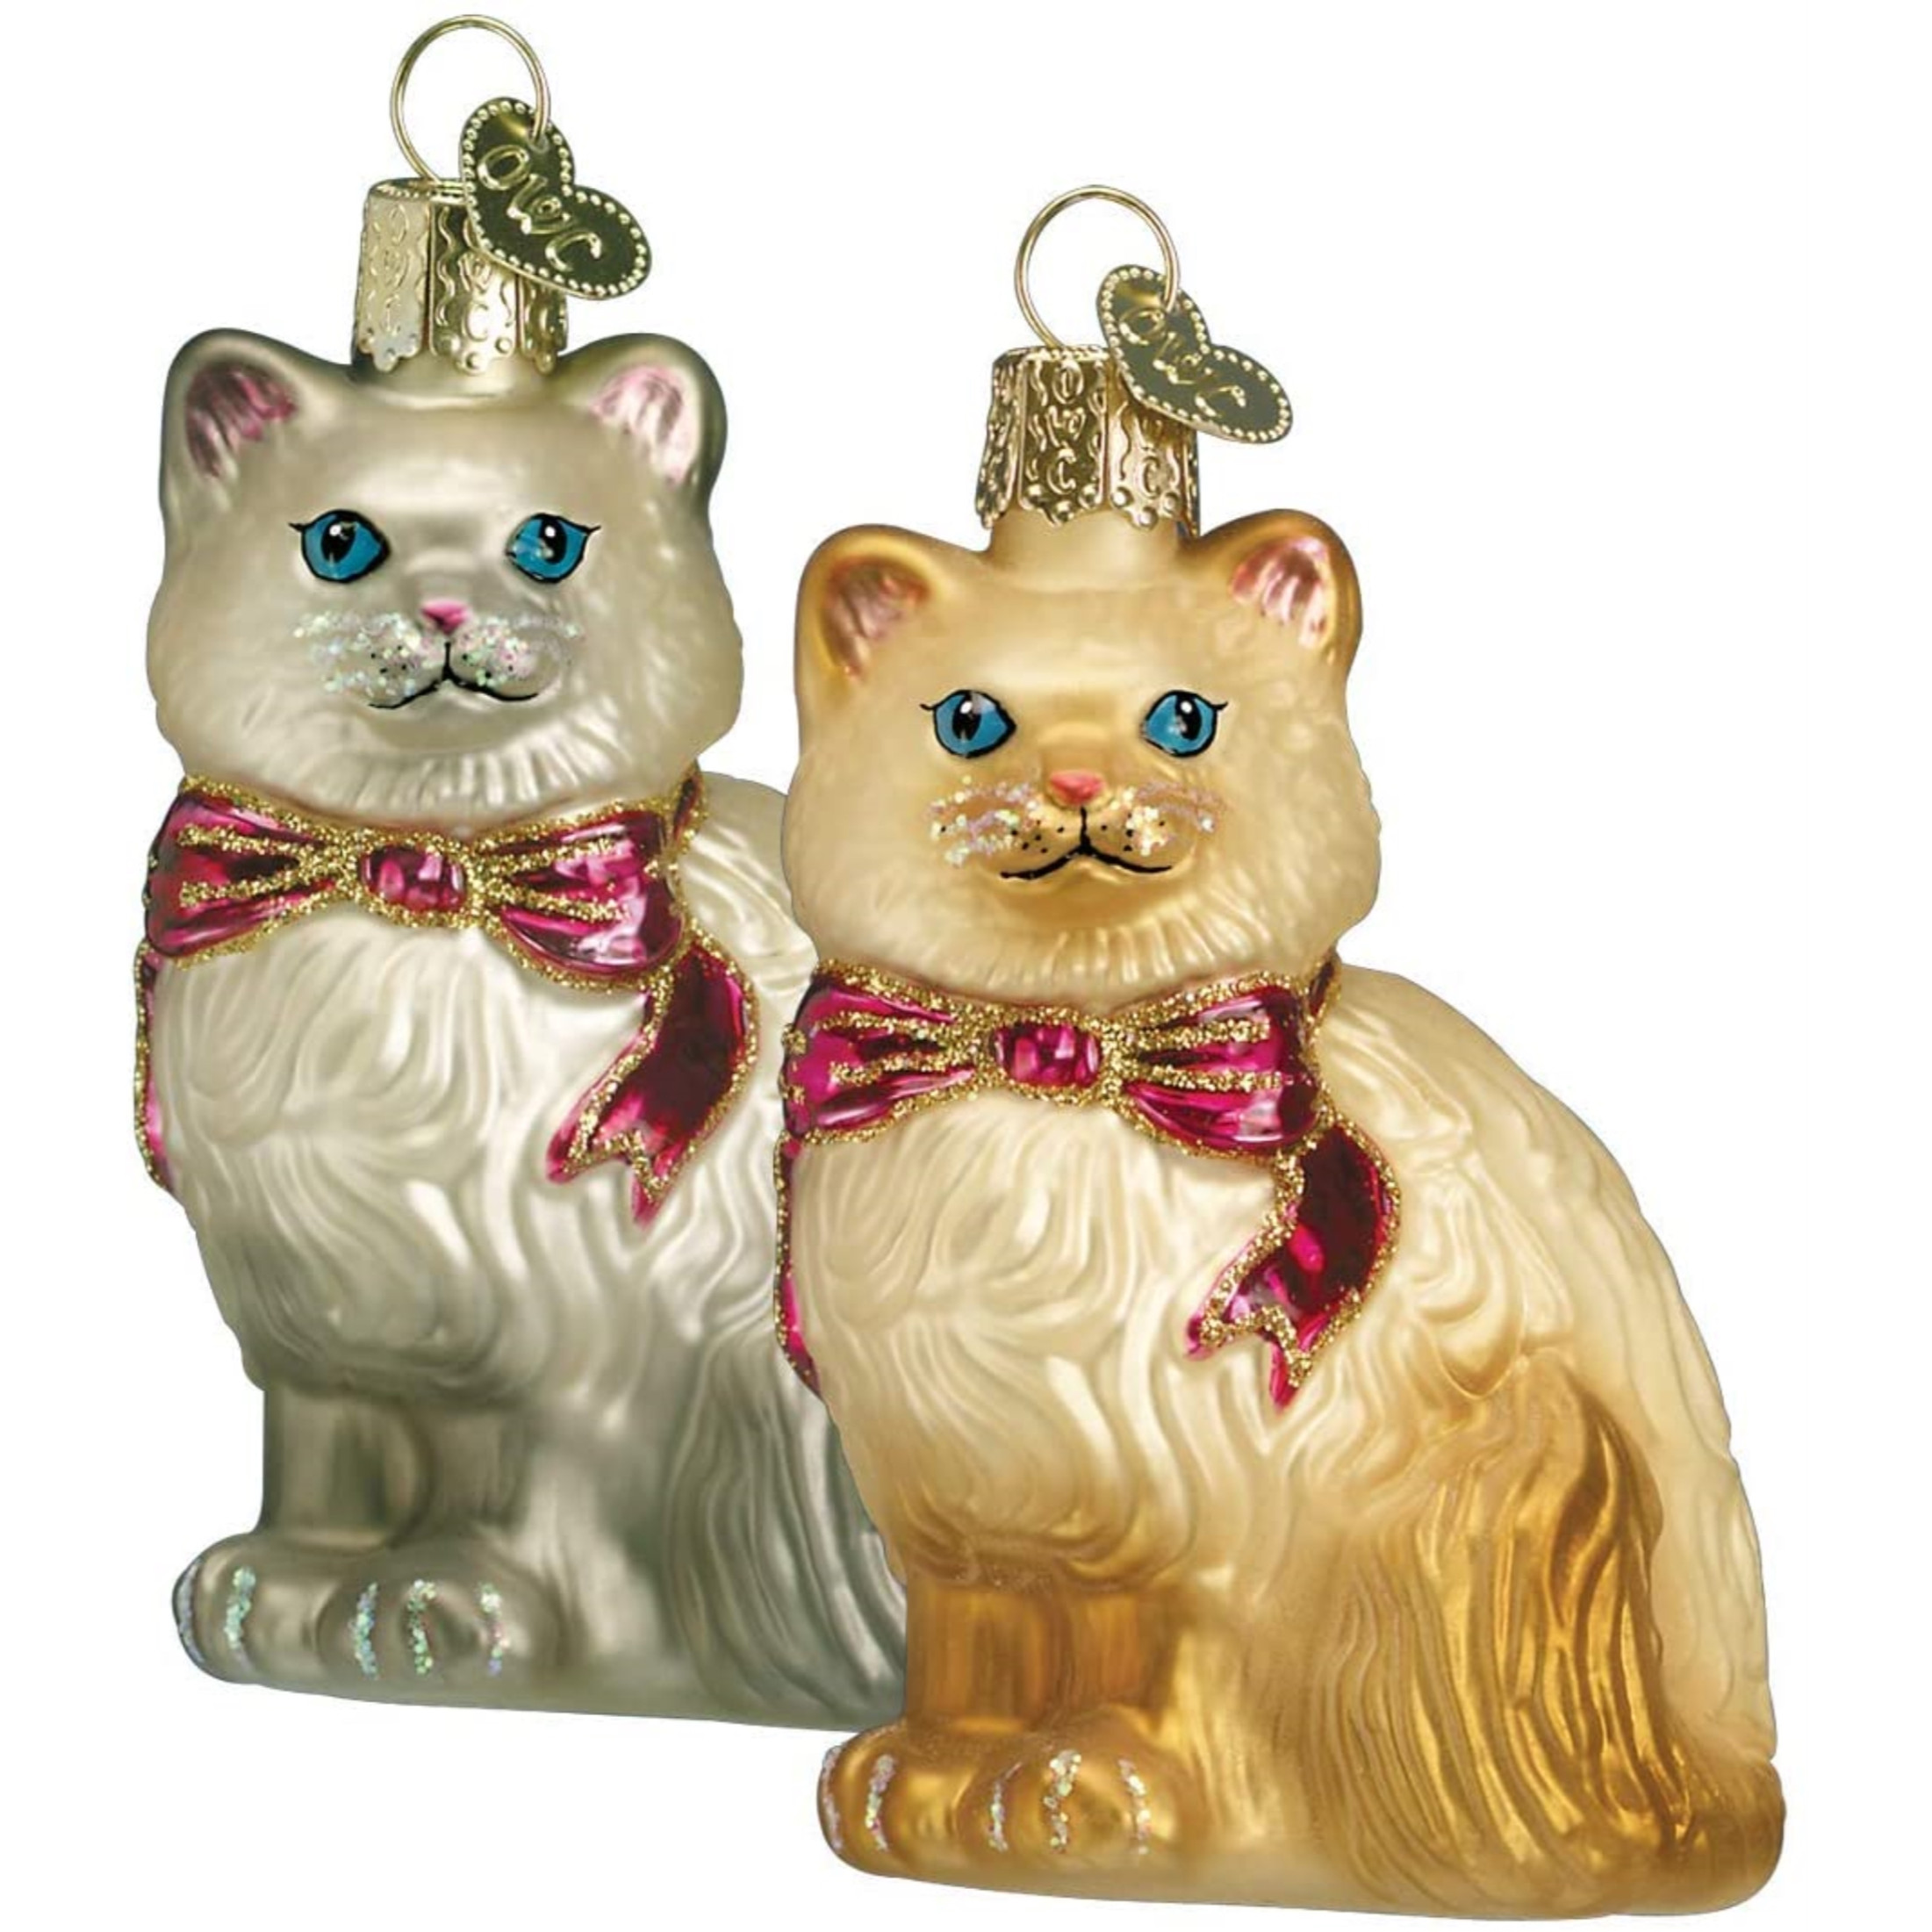 Old World Christmas Glass Blown Ornament with OWC Gift Box, Himalayan Kitty (Set of 2)